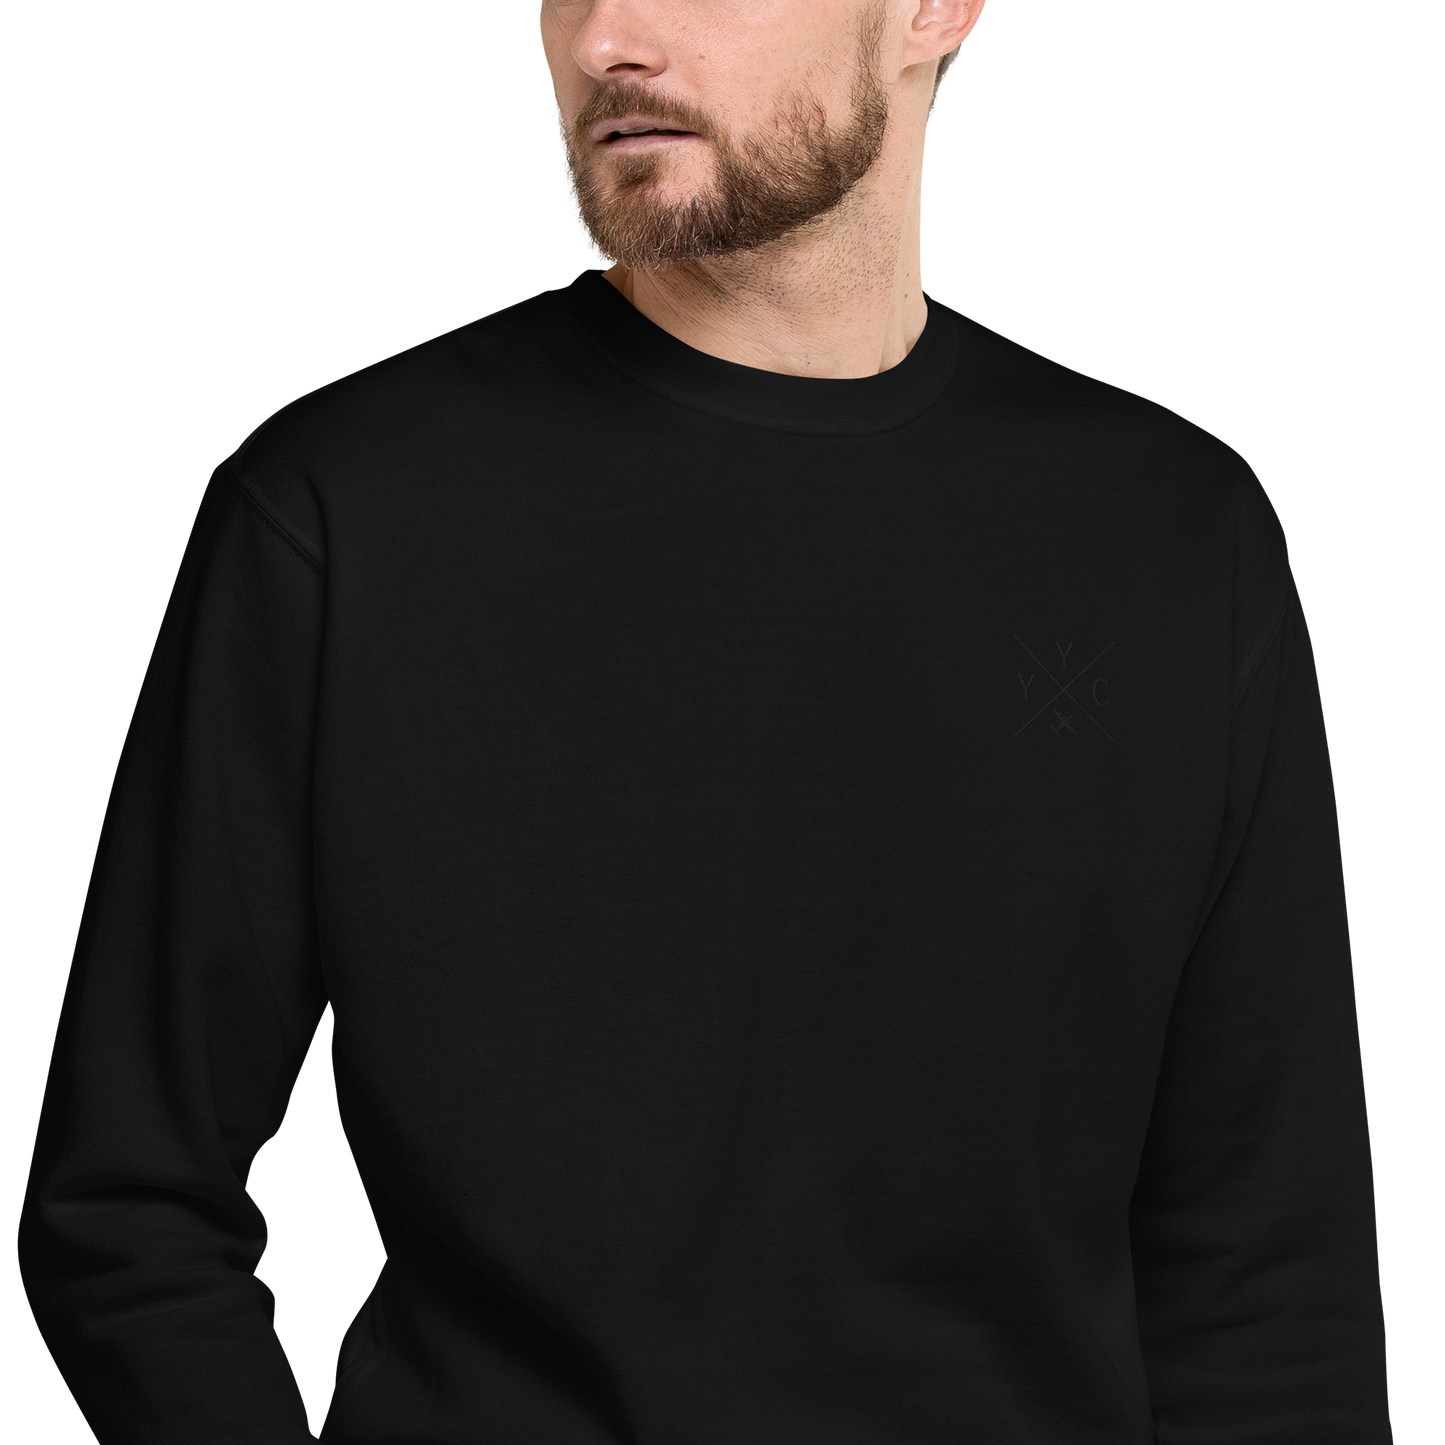 YHM Designs - YYC Calgary Premium Sweatshirt - Crossed-X Design with Airport Code and Vintage Propliner - Black Embroidery - Image 05